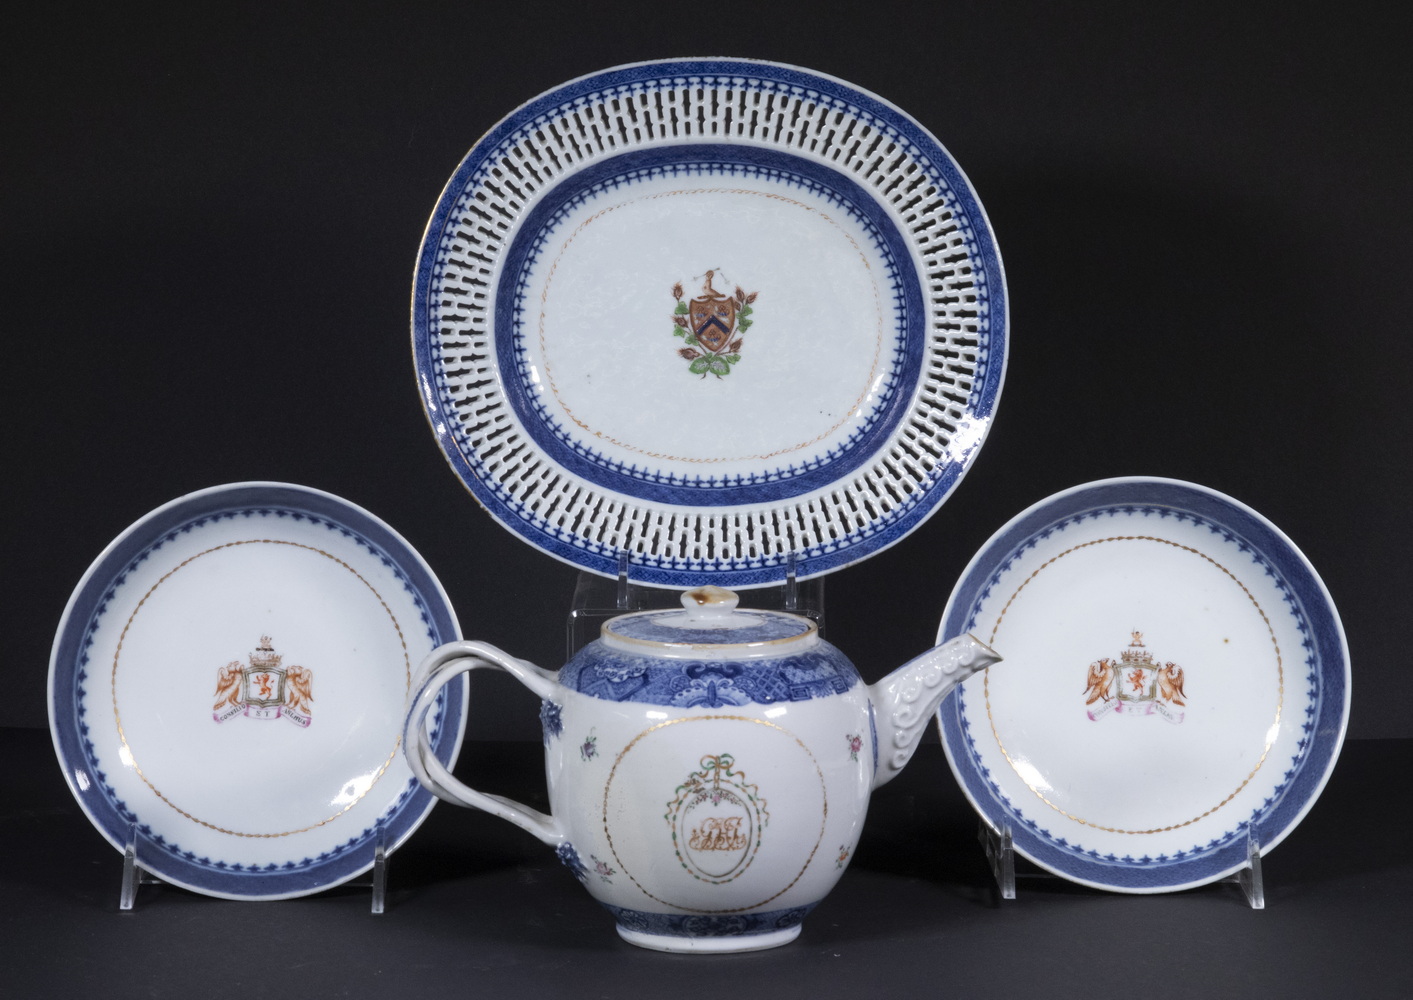 CHINESE EXPORT ARMORIAL PORCELAIN 2b3be6